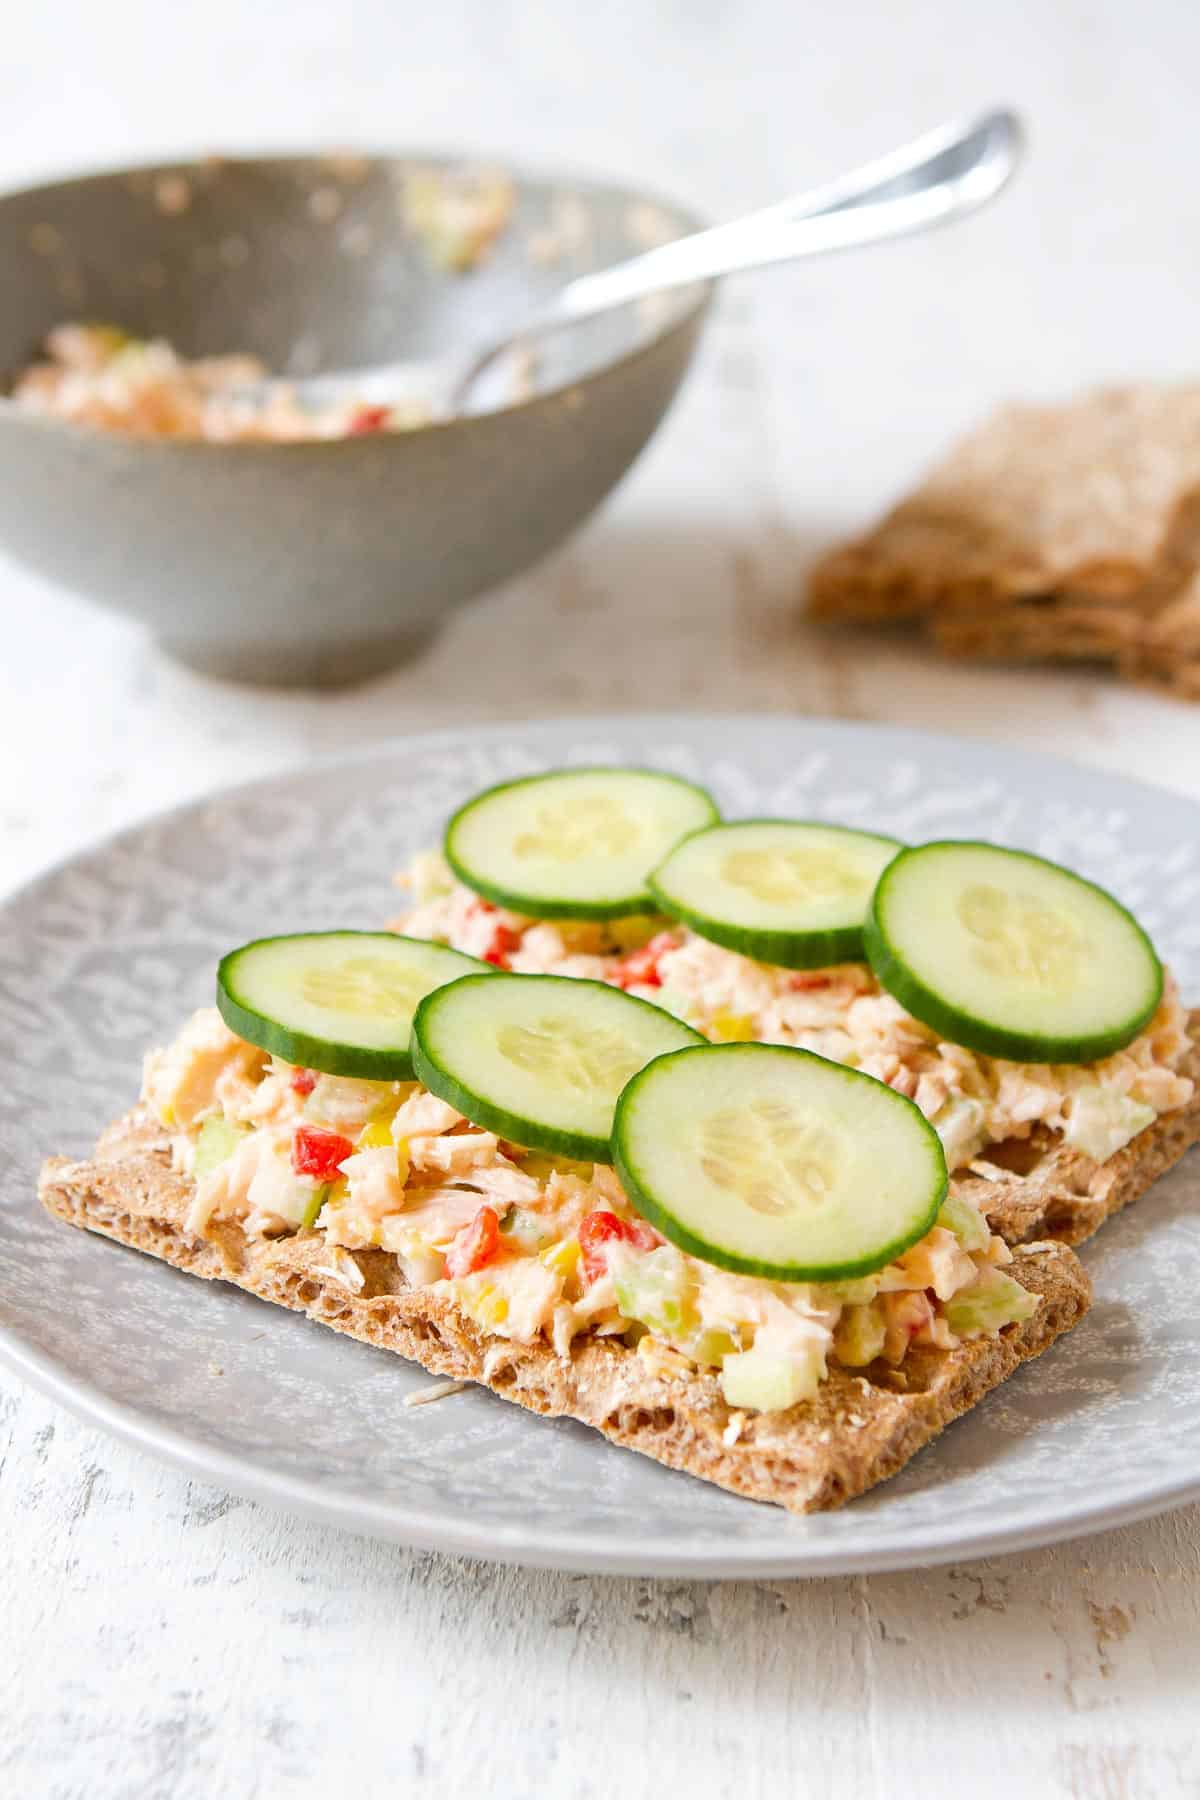 Tuna salad on crackers, topped with cucumber slices.